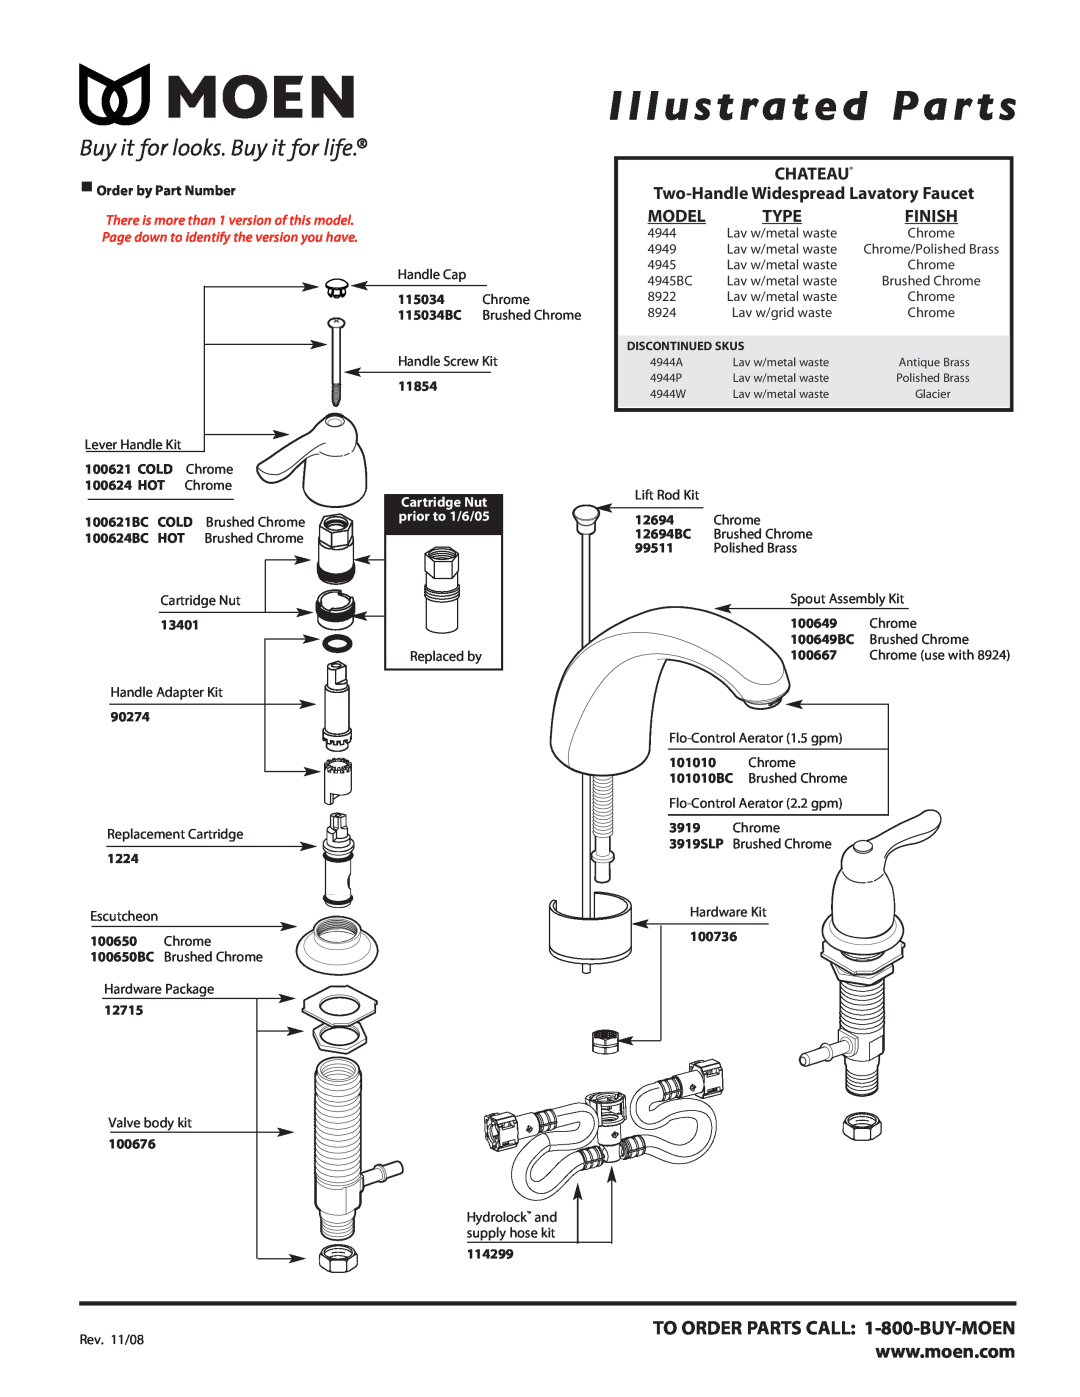 Moen 4949 manual Illustrated Par ts, TO ORDER PARTS CALL 1-800-BUY-MOEN, CHATEAU Two-Handle Widespread Lavatory Faucet 